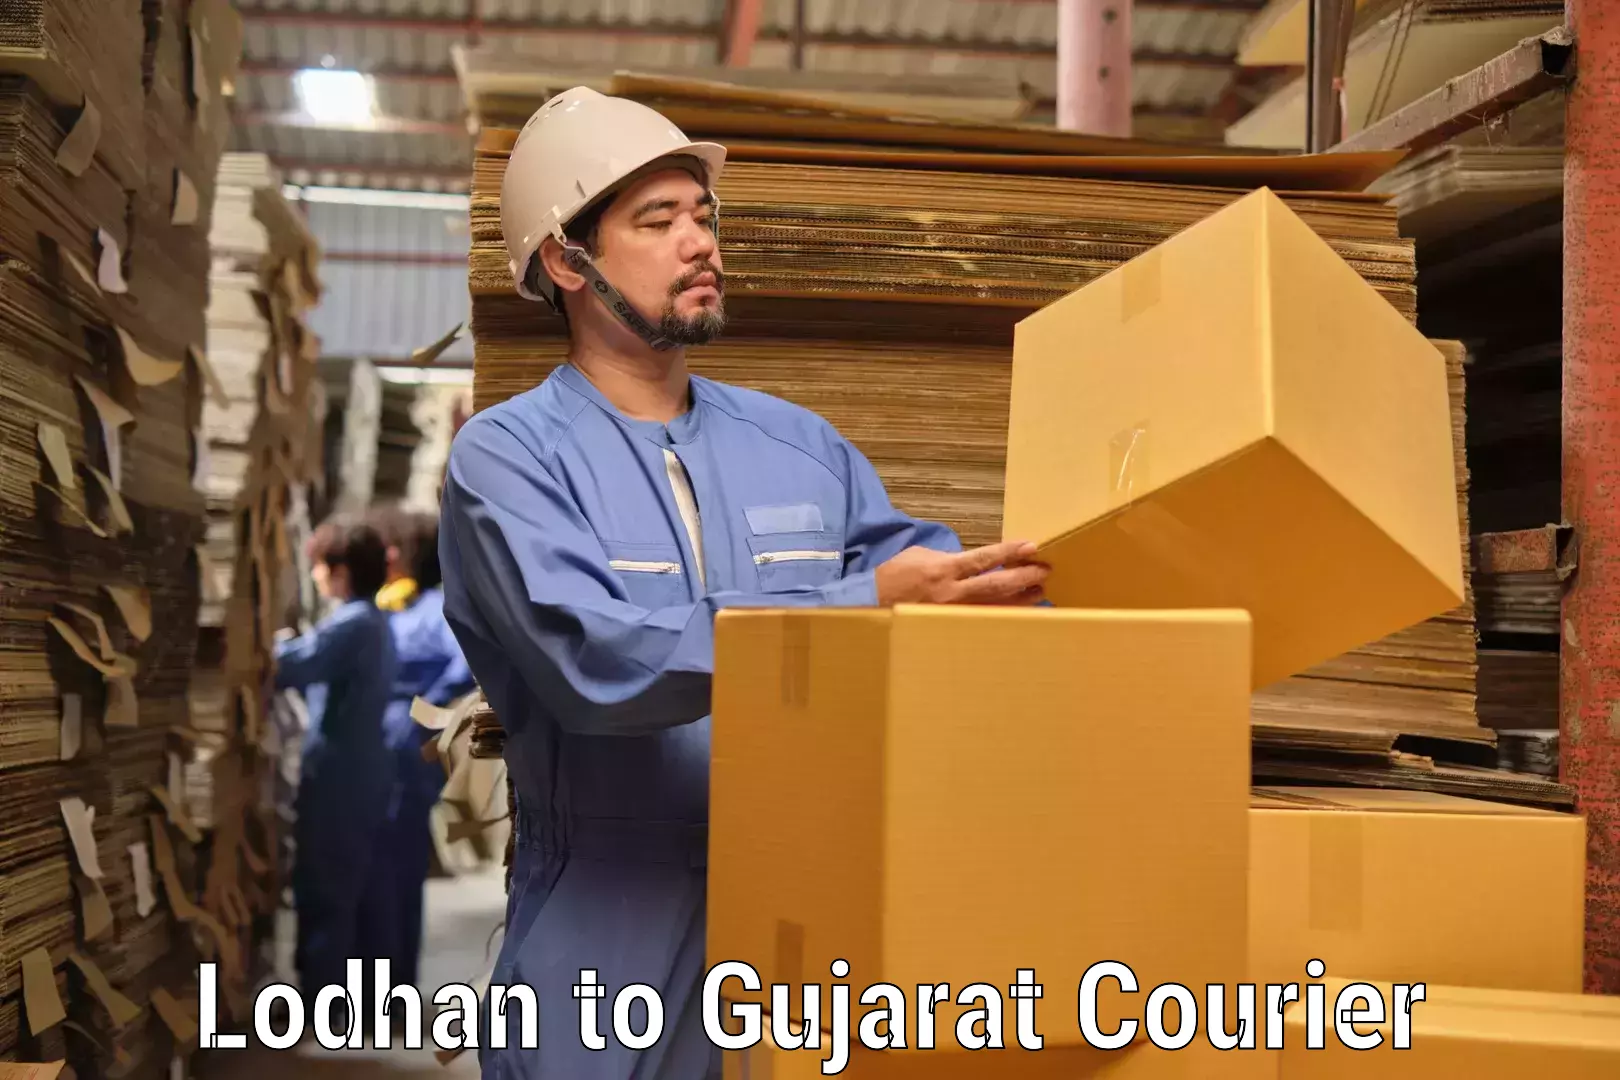 Automated parcel services Lodhan to Ahmedabad